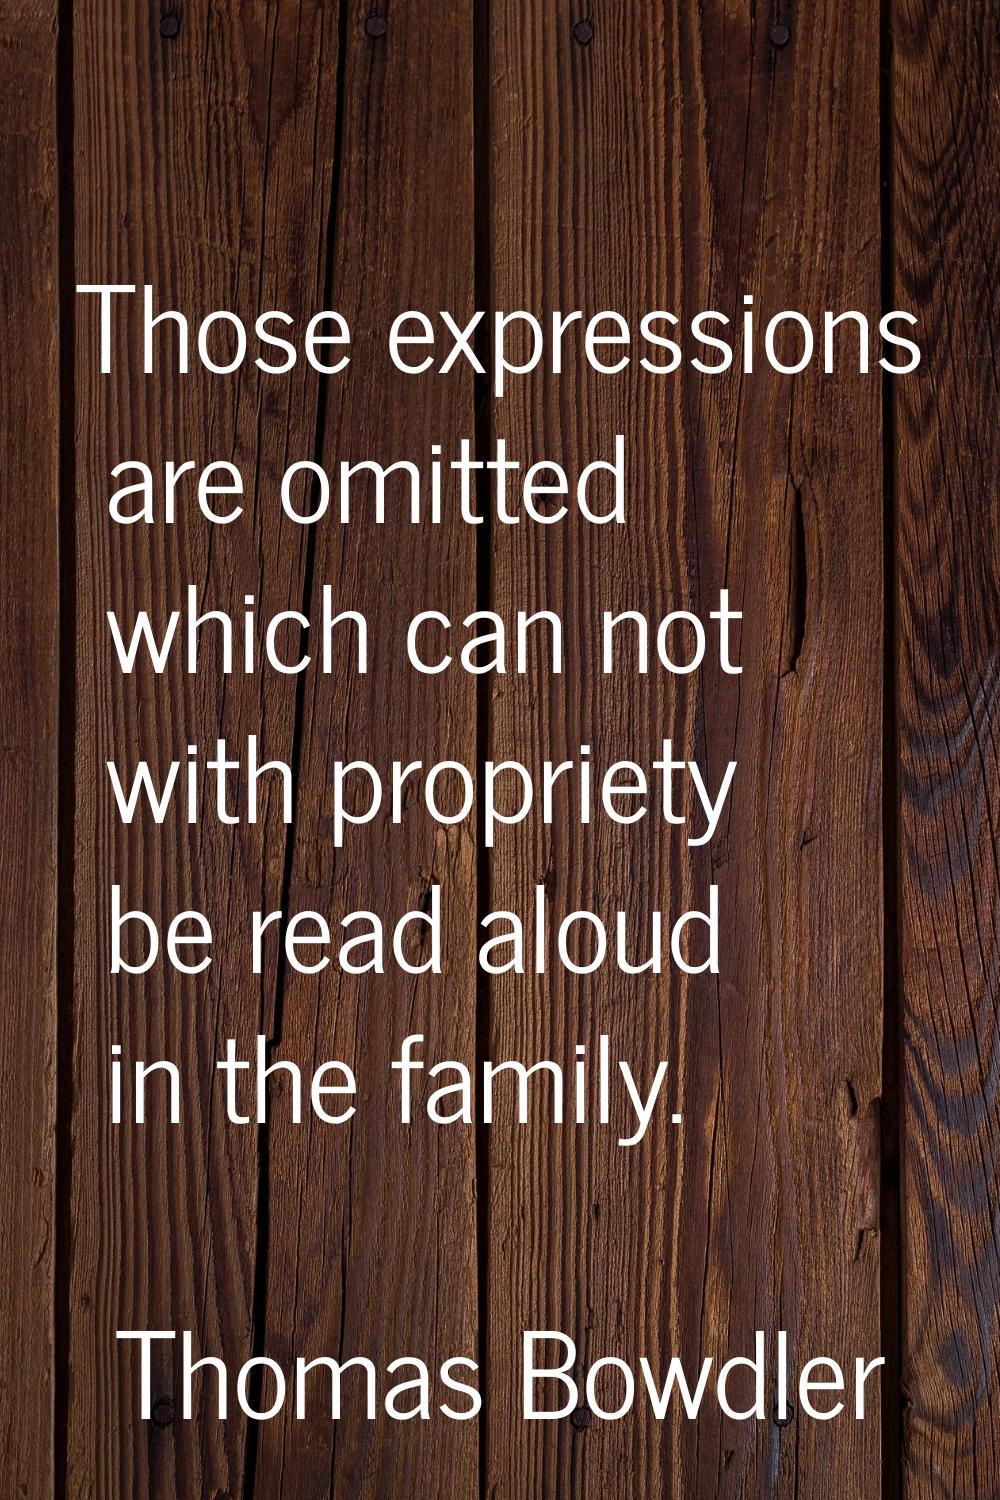 Those expressions are omitted which can not with propriety be read aloud in the family.